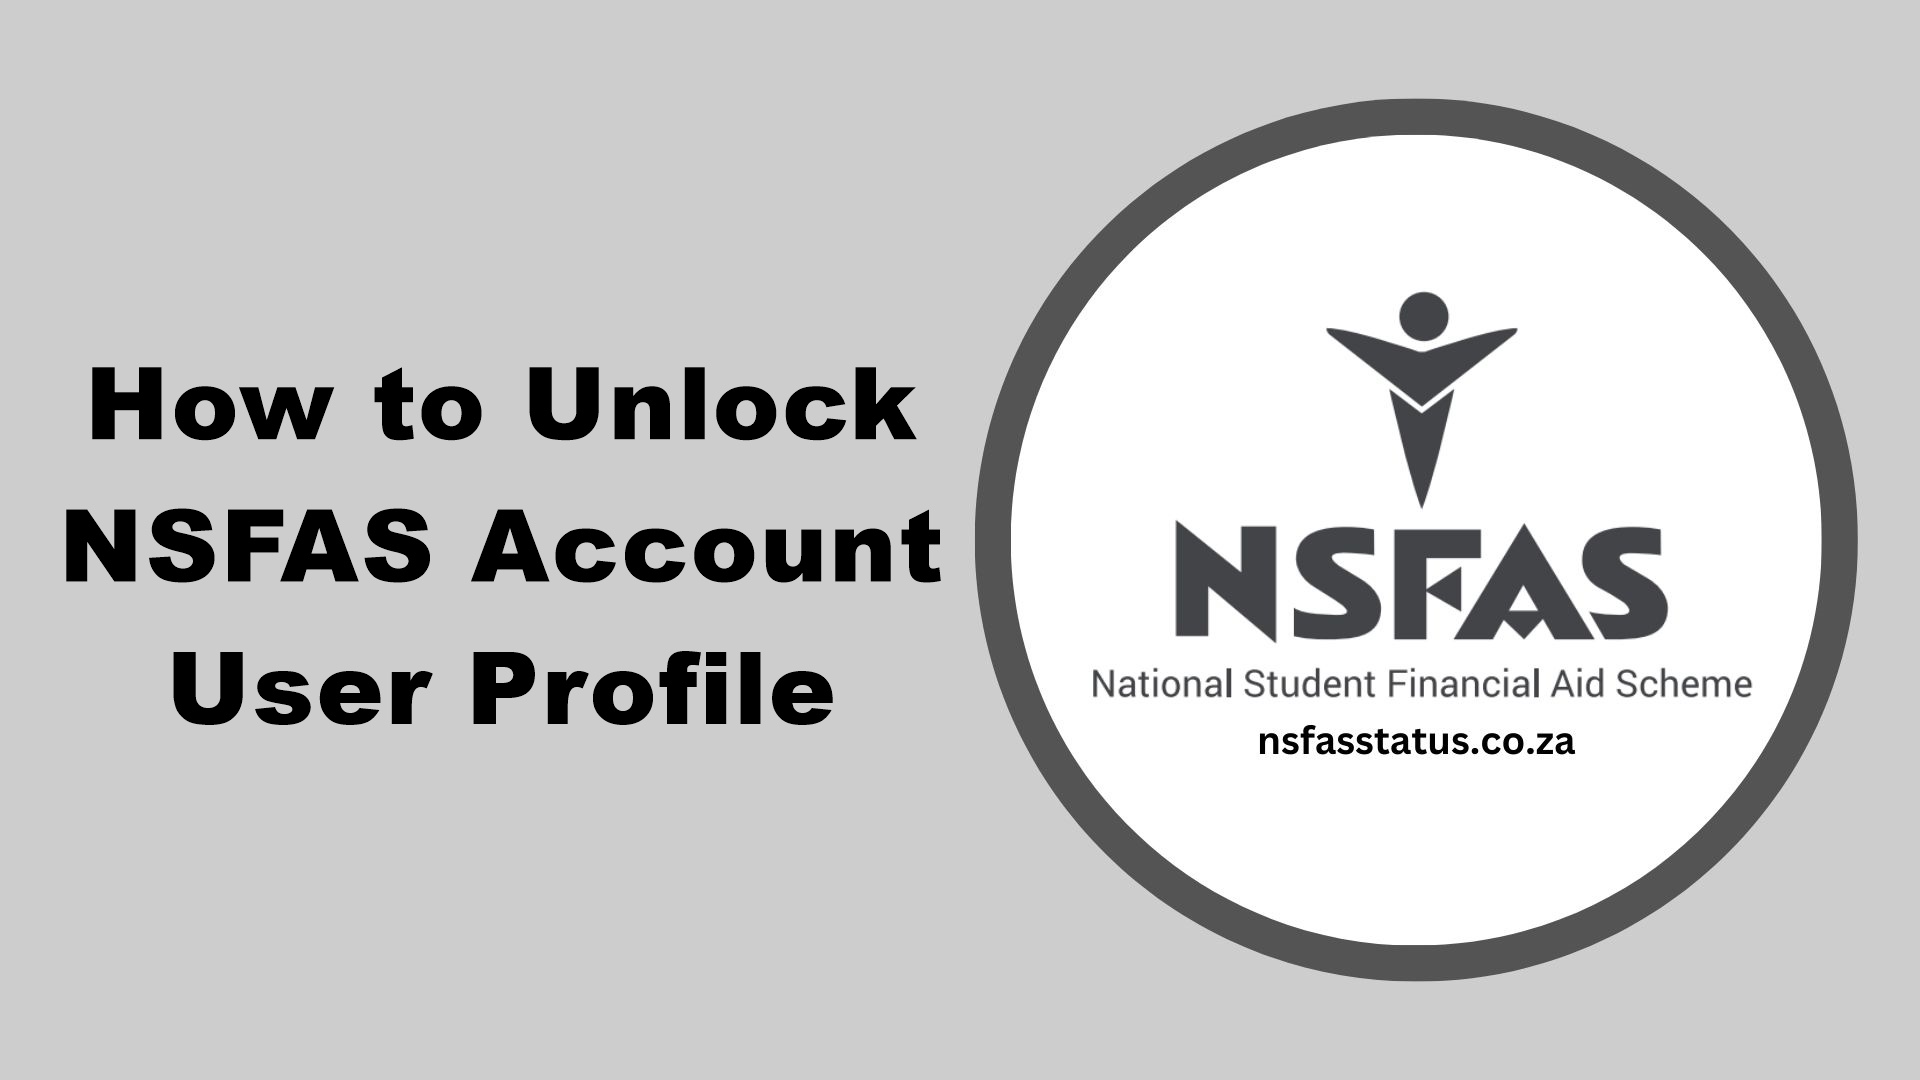 How to Unlock NSFAS Account User Profile